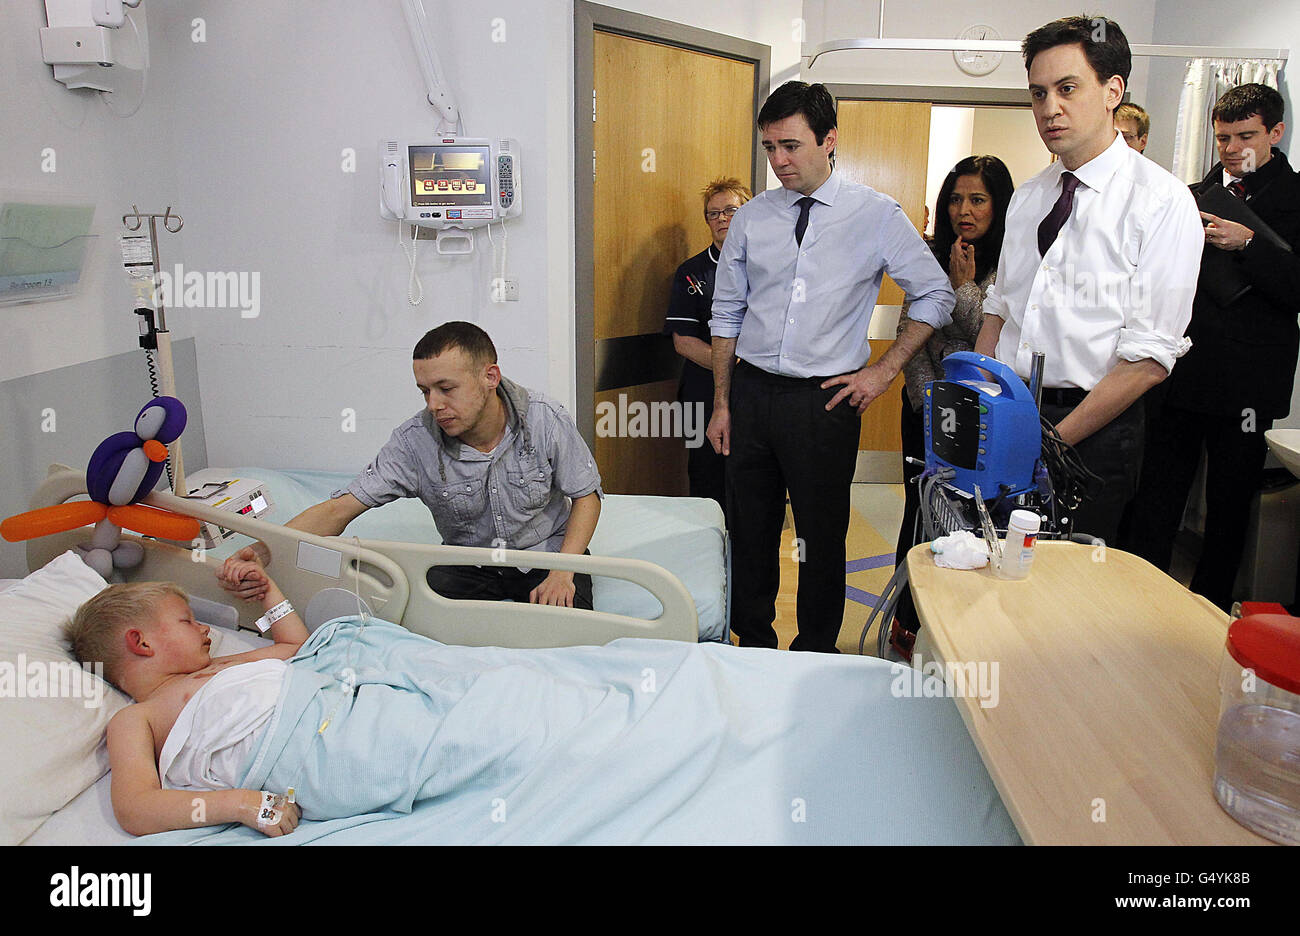 Labour leader Ed Miliband (right) and shadow health secretary Andy Burnham meet meet Steven Lowe and his son Lincoln, 4, during a visit to the Royal Bolton Hospital in Greater Manchester. Stock Photo